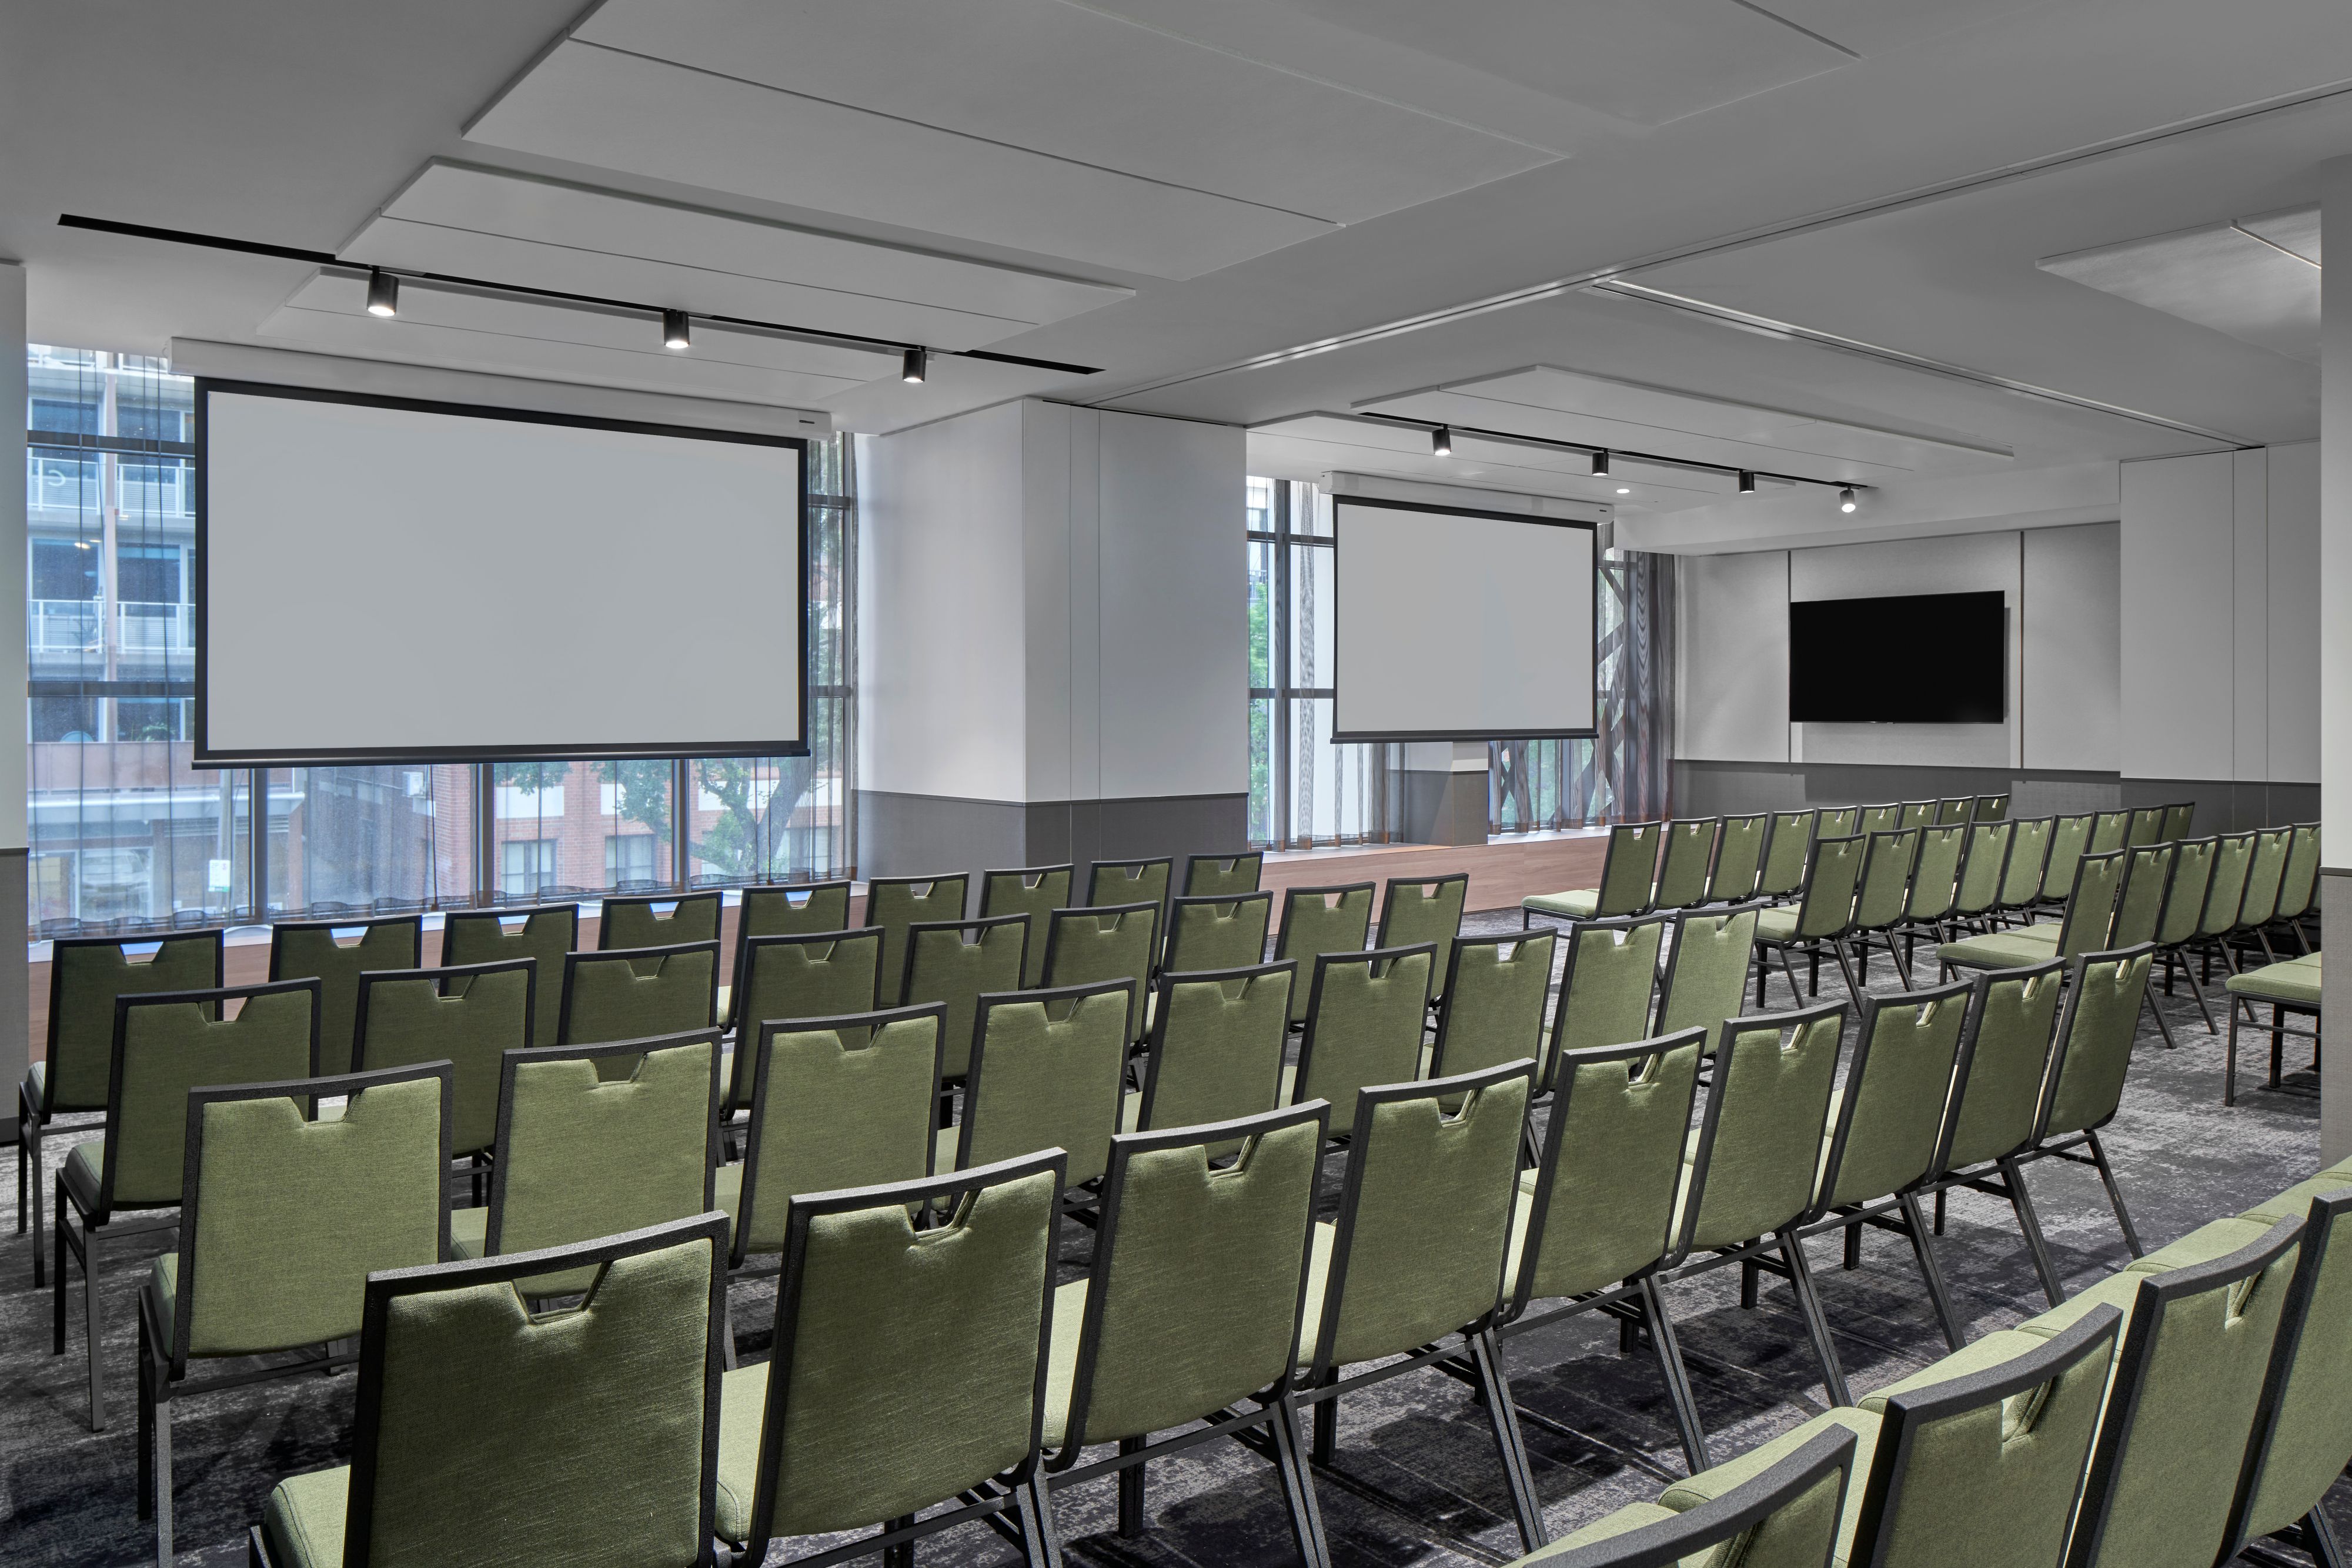 Large meeting room with rows of chairs and projector screens